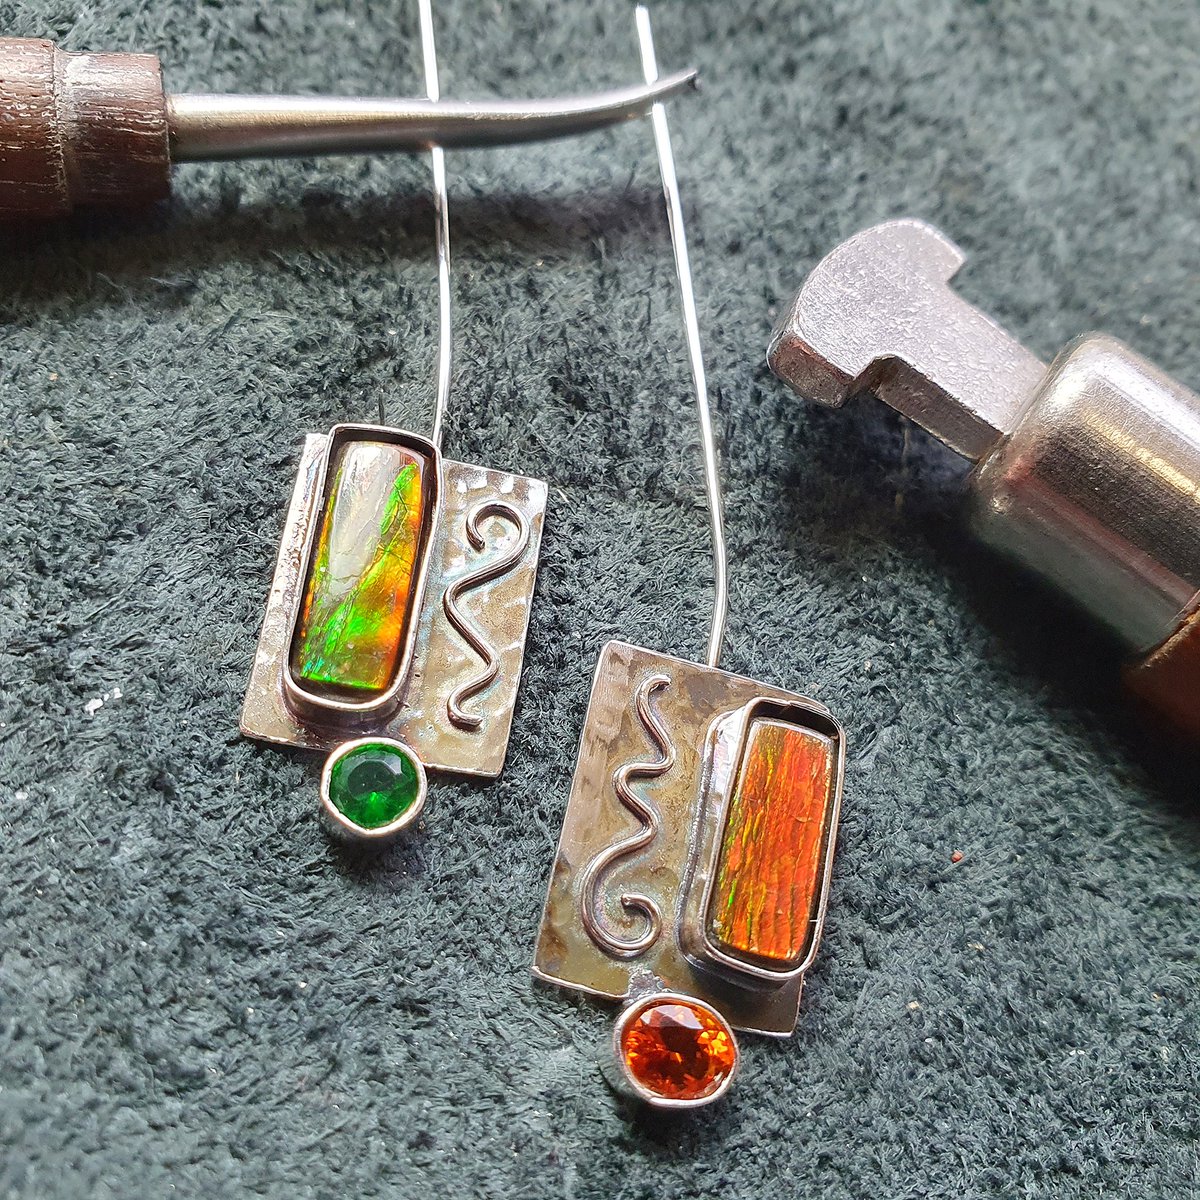 Back at the bench after 2 days stewarding in the galleries. Just finishing up these ammolite emerald and citrine earrings.

#UKGiftHour #UKGiftAM #shopindie #handmade #handmadejewelry #handmadeuk